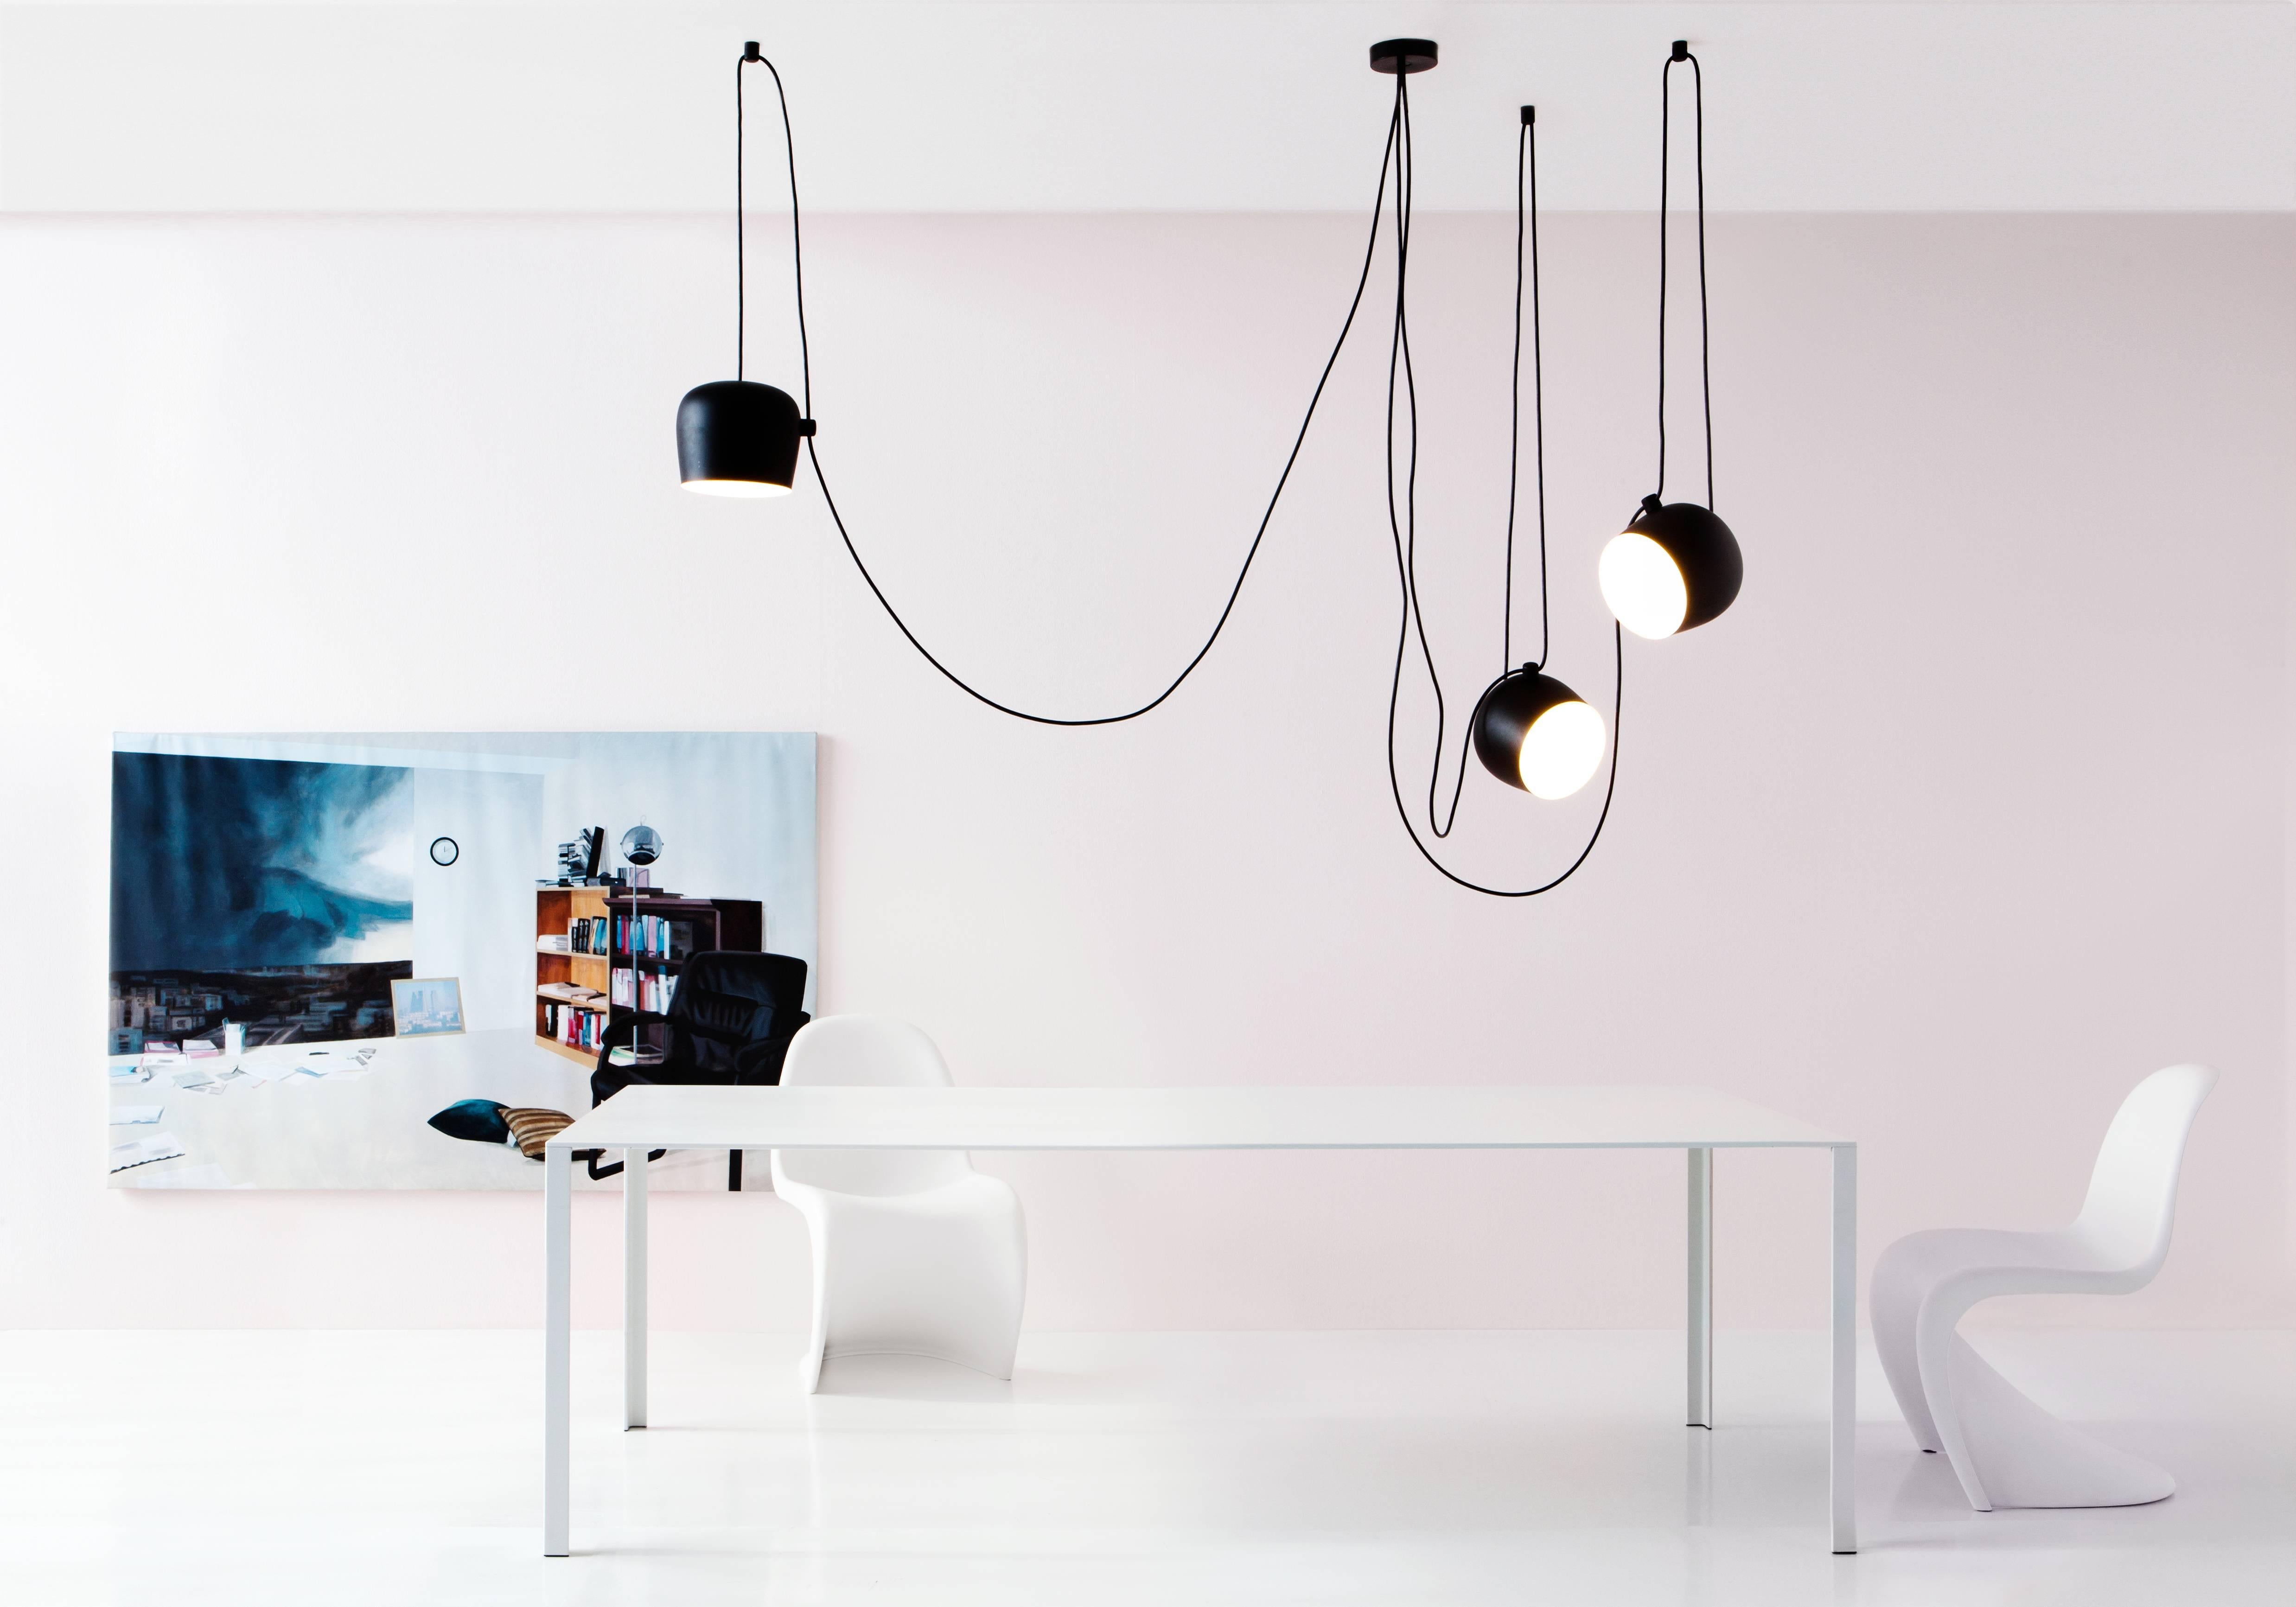 FLOS Aim Small Black Three-Lamp Light Set w/ Canopy by Ronan & Erwan Bouroullec

Created by the Bouroullec brothers in 2010, the AIM ceiling light is a design stripped to its most basic and beautiful essence. This innovative form of modern pendant